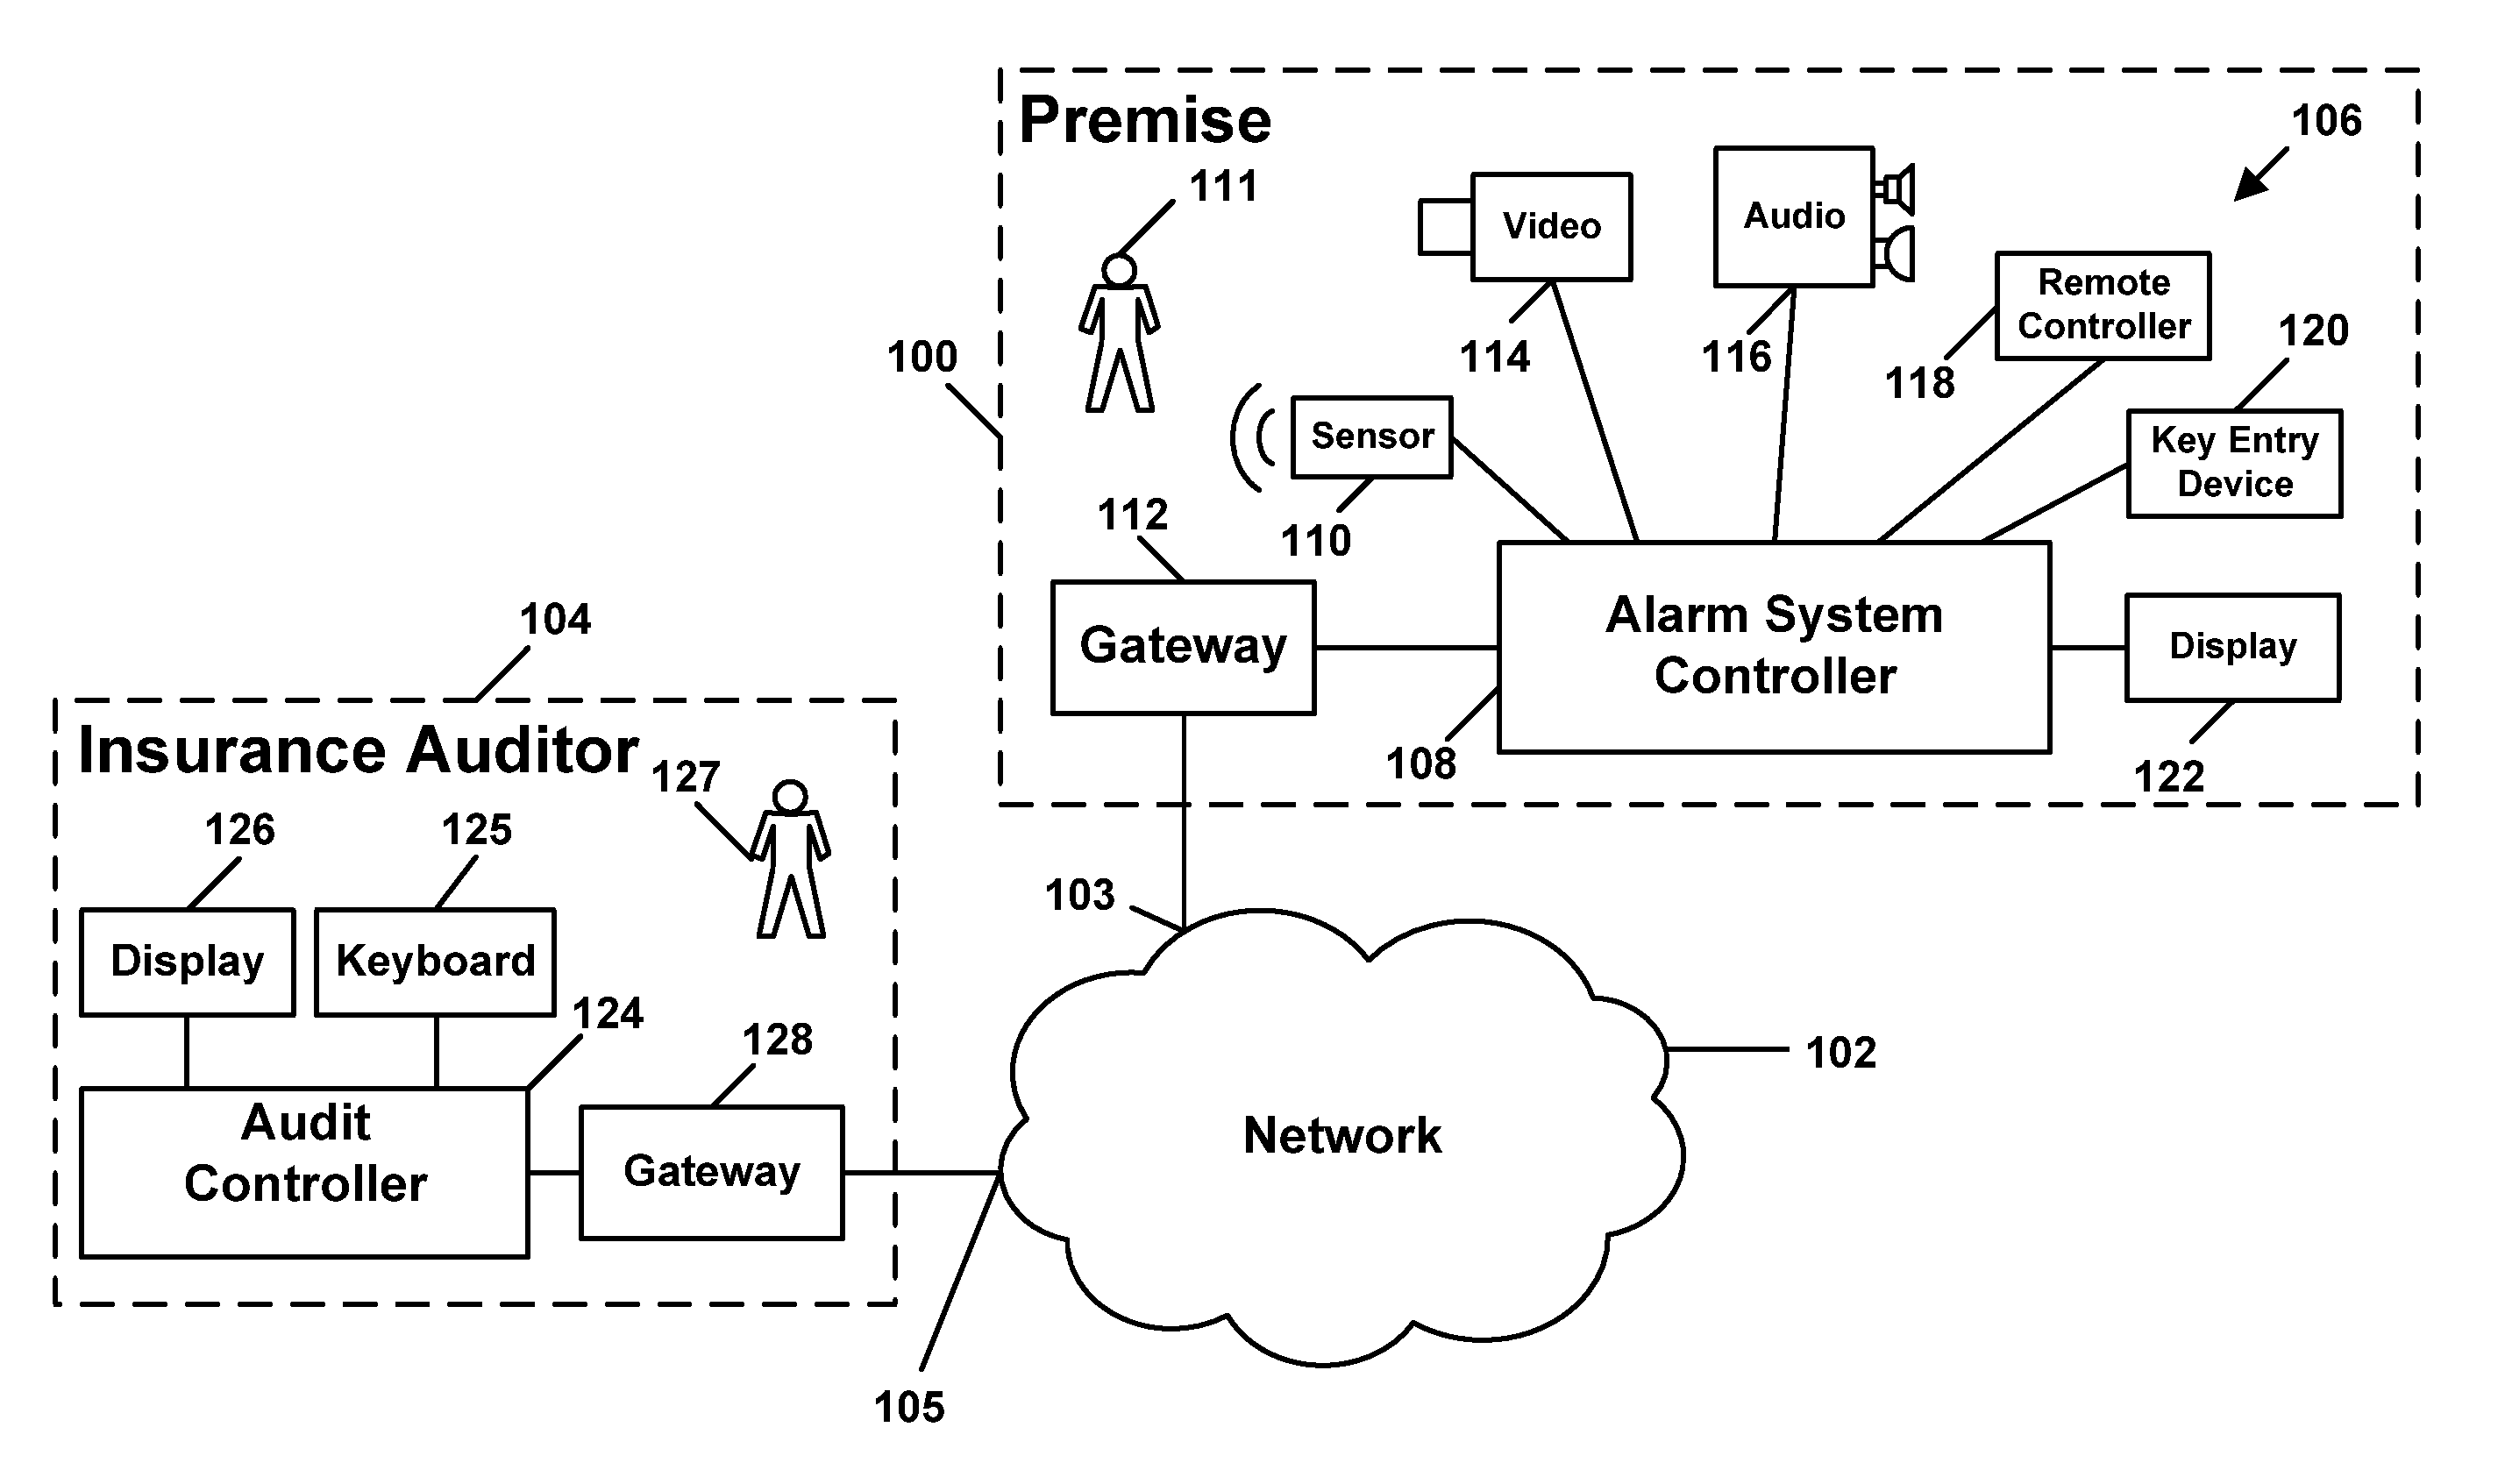 Method and system for an insurance auditor to audit a premise alarm system